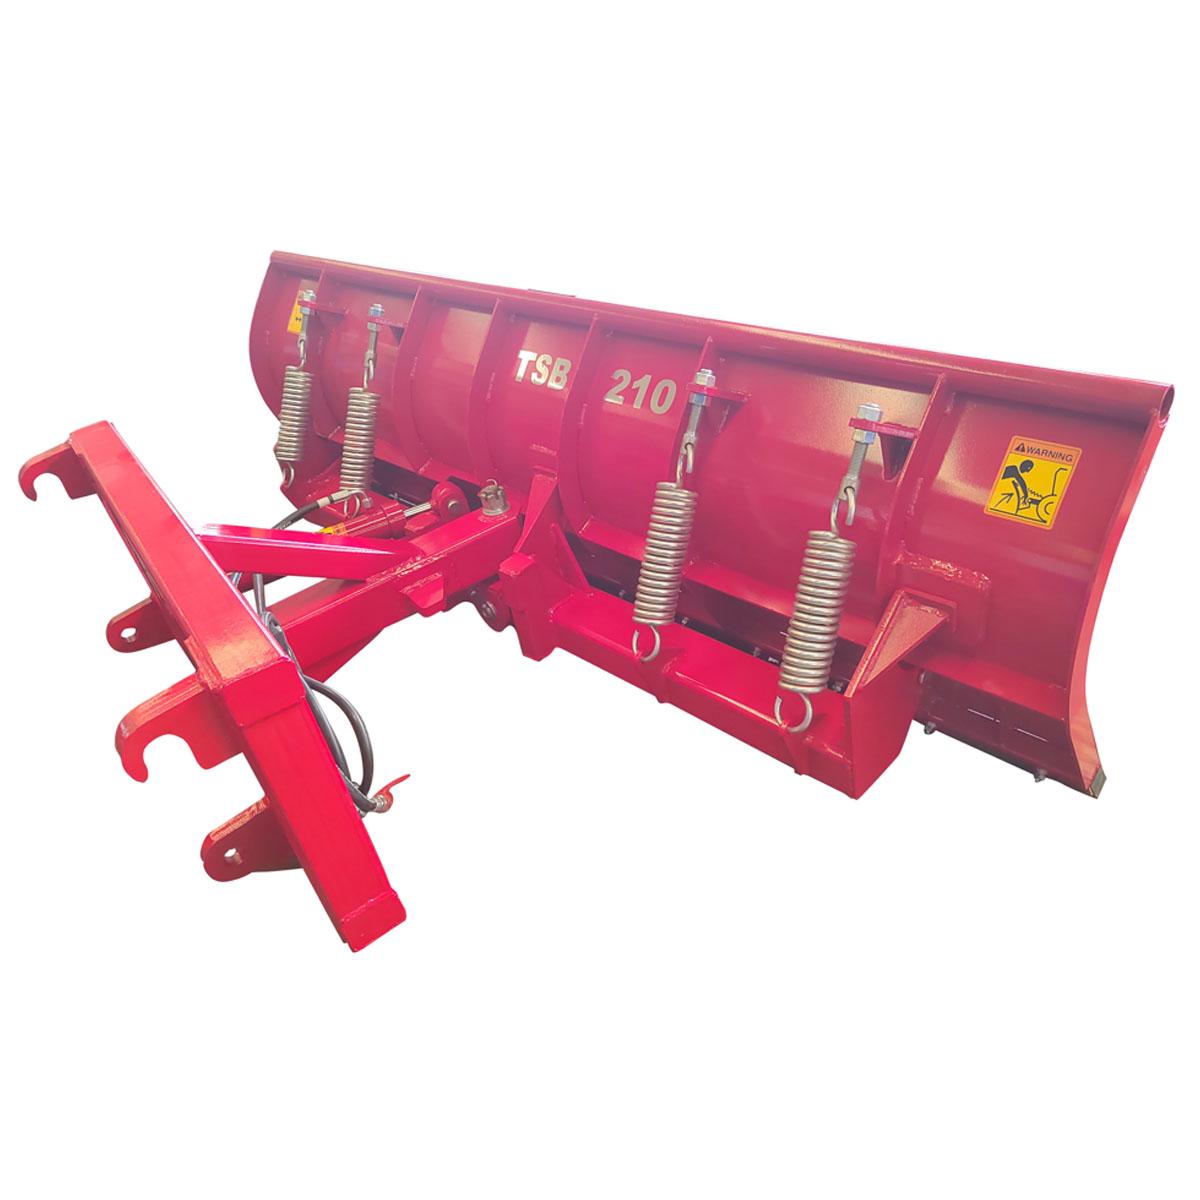 Value Industrial 7 Foot Tractor Snow Blade - hydraulic controls - 26 degree angle